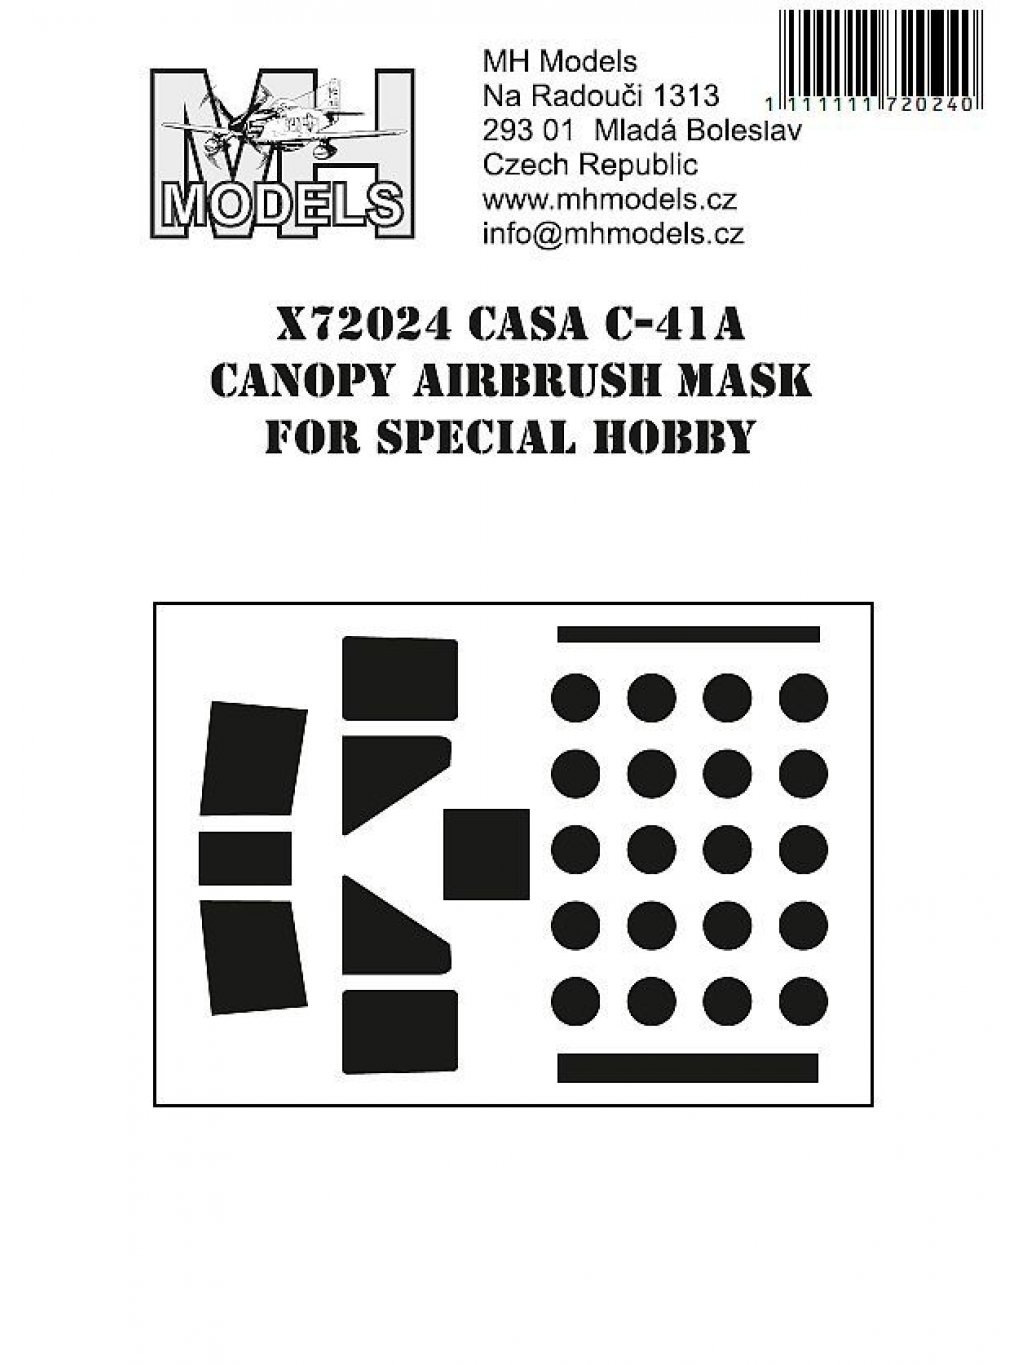 CASA C-41A canopy airbrush mask for Special Hobby